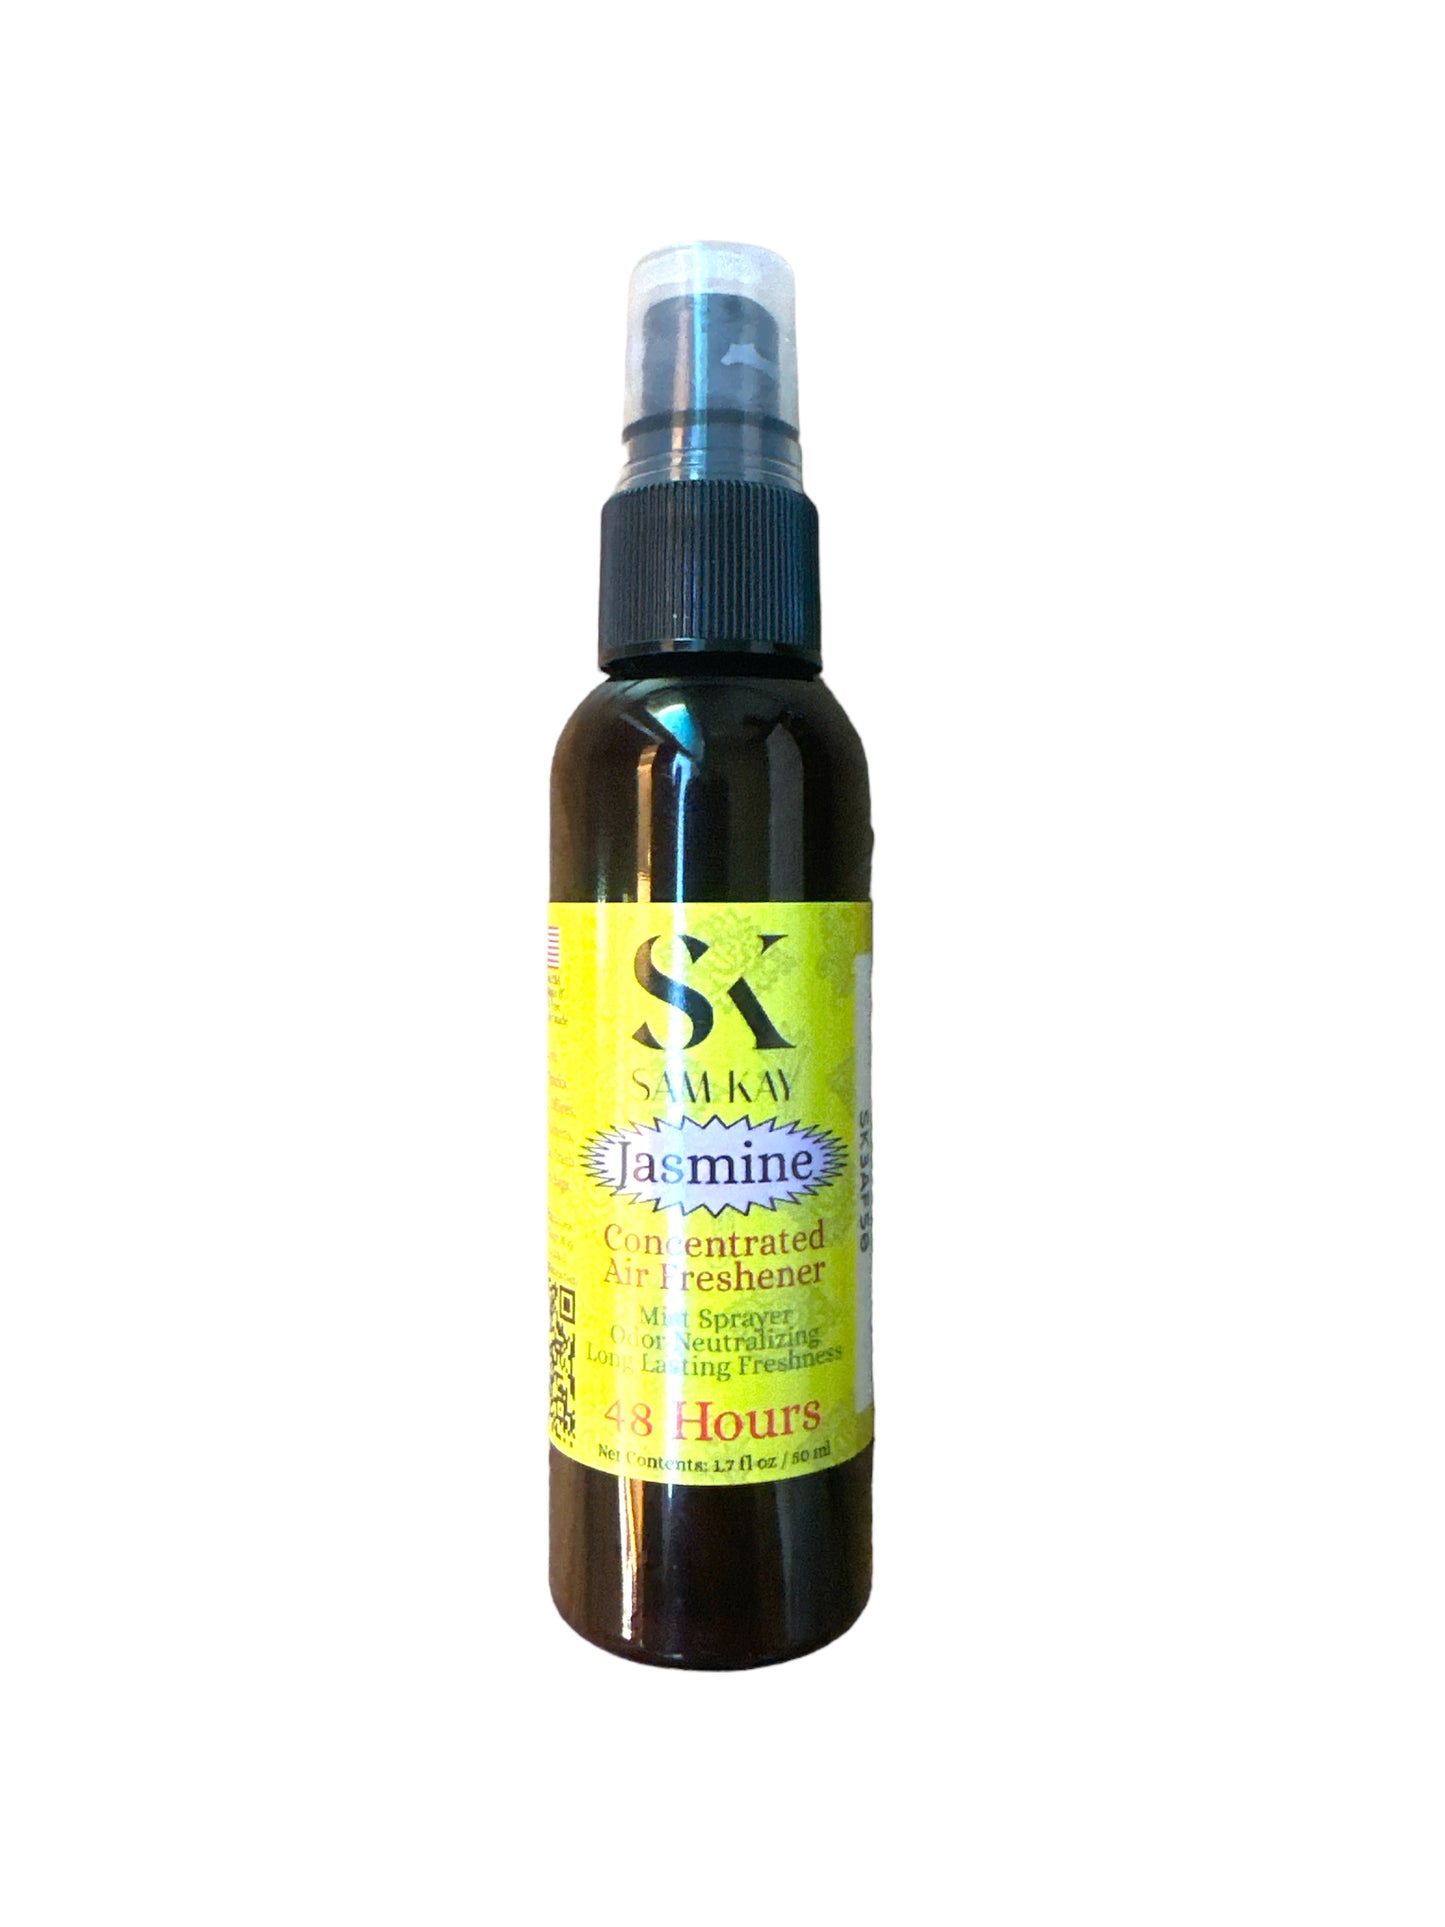 Jasmine - Concentrated Air Freshener Mist Sprayer Odor Neutralizing Lasts 48 Hours Made in USA